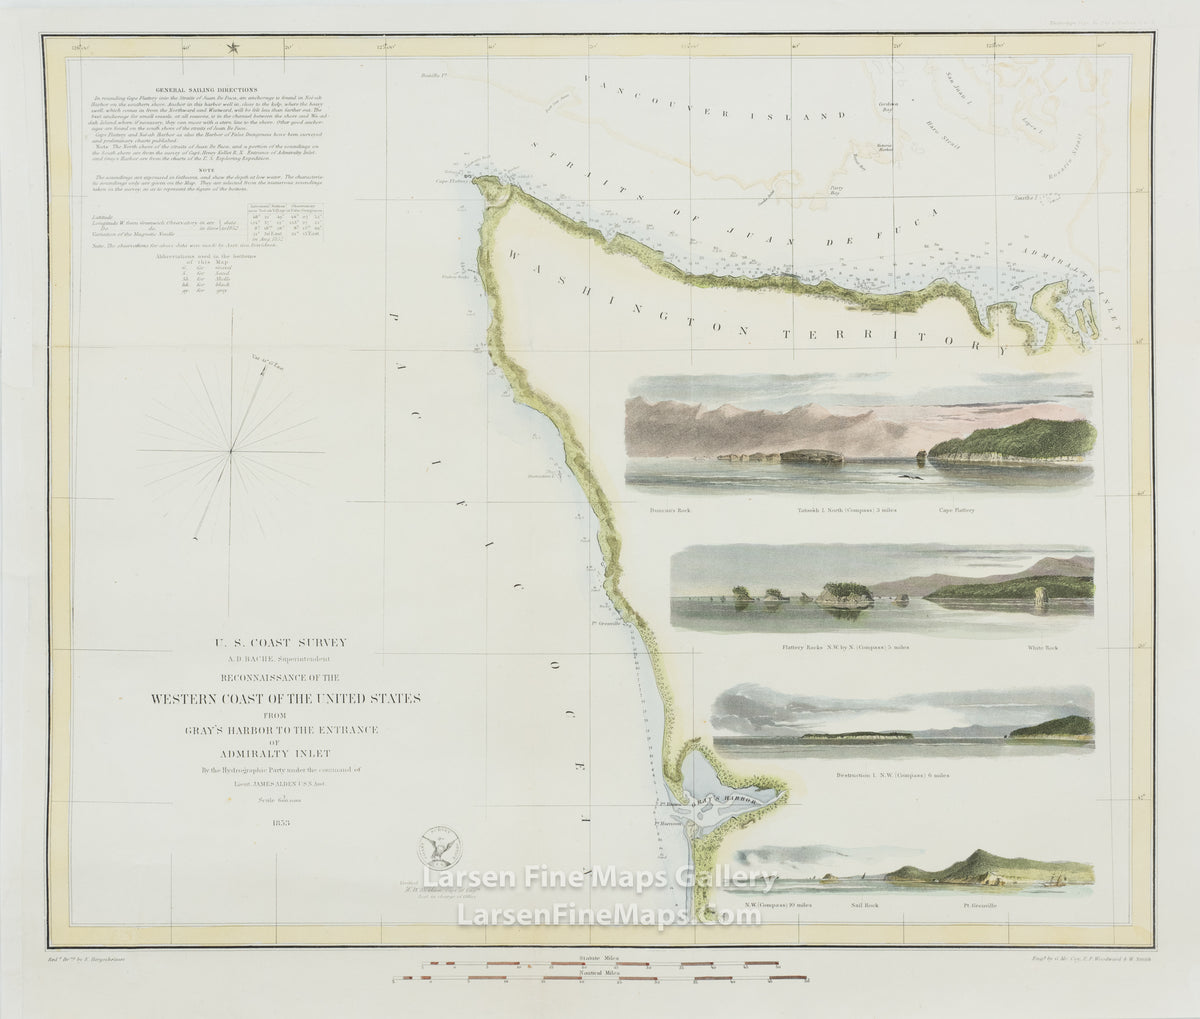 Reconnaissance of the Western Coast of The United States from Gray's Harbor to the Entrance of Admiralty Inlet